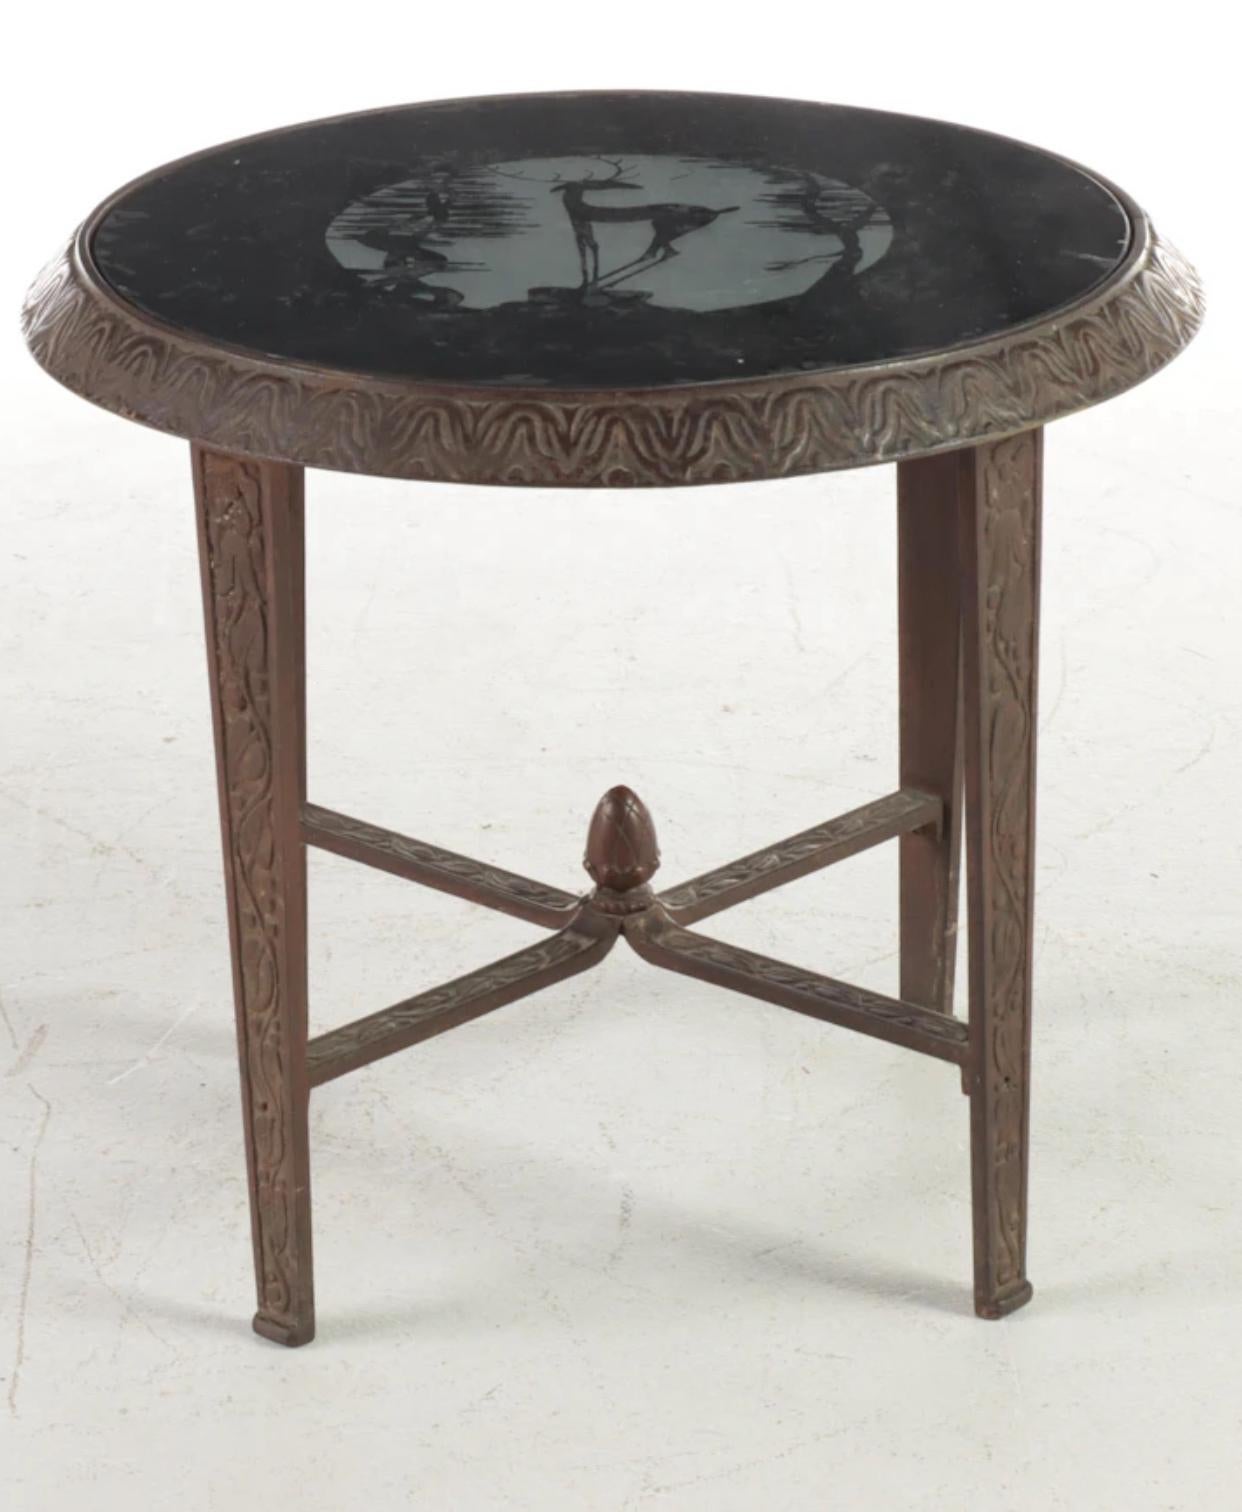 Art Deco cast iron side table with a beautiful black, cut to frosted vitrolite top. Crisp cast iron that has been stripped of any lacquer or enamel. A few areas of oxidation that can be polished out if desired. 